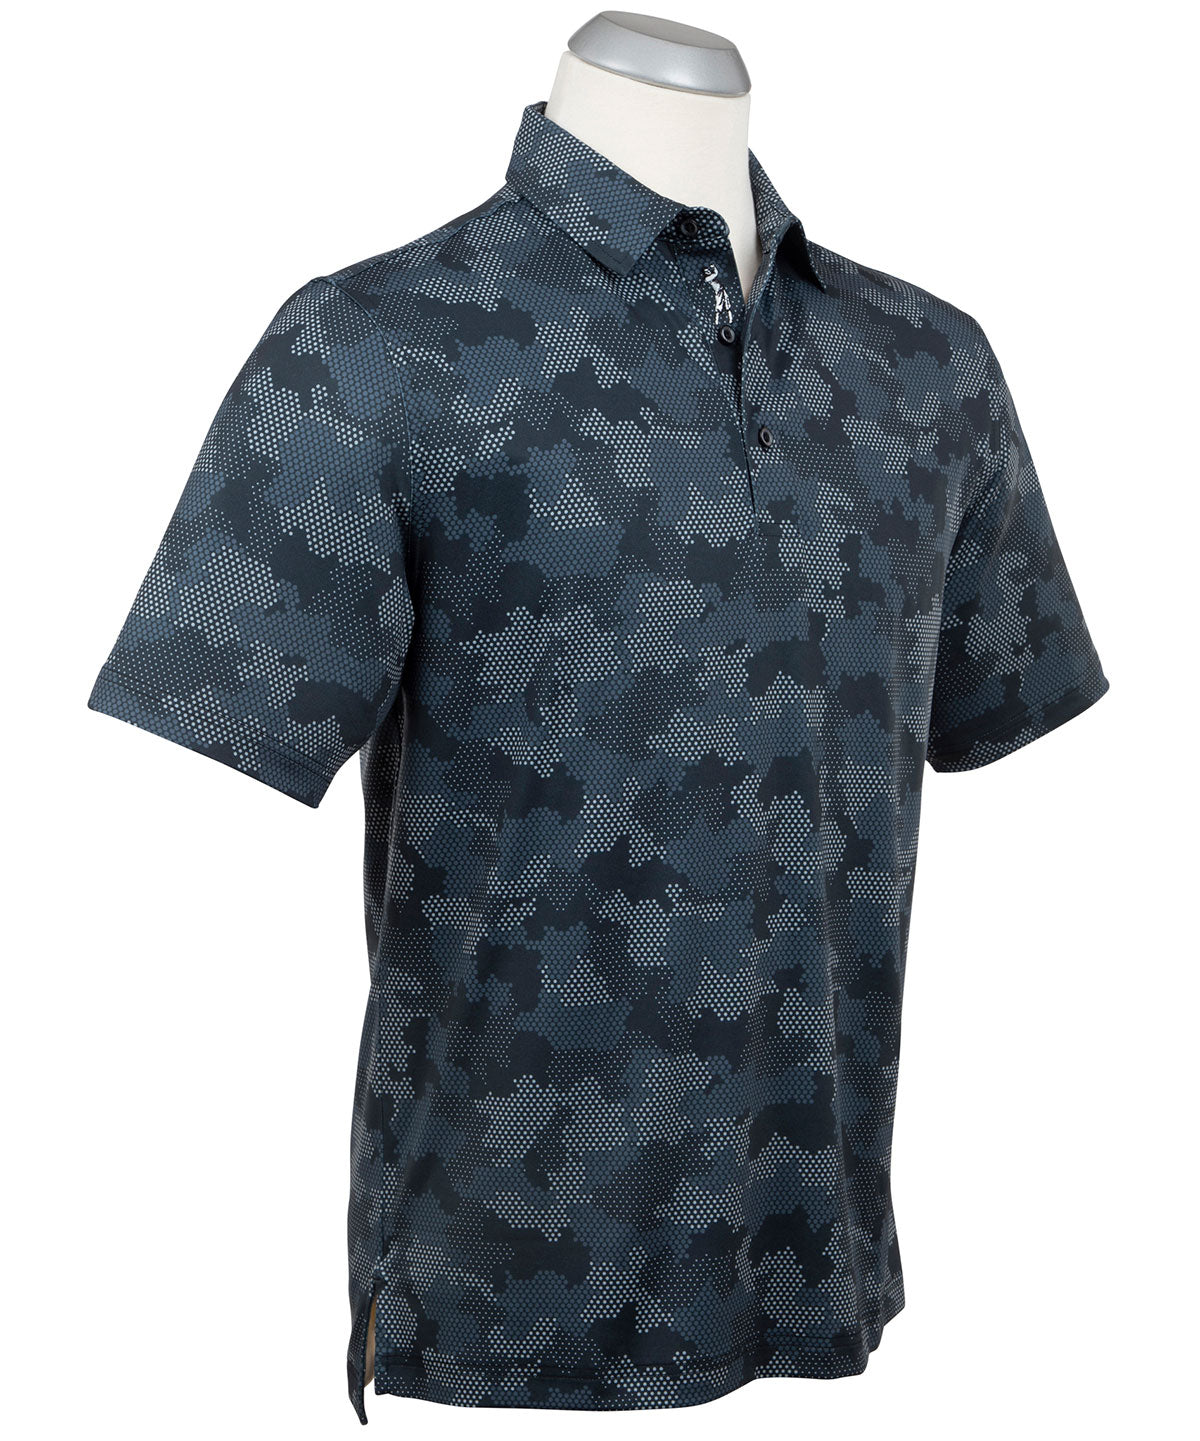 Performance Jersey Armed Forces Camo Print Polo